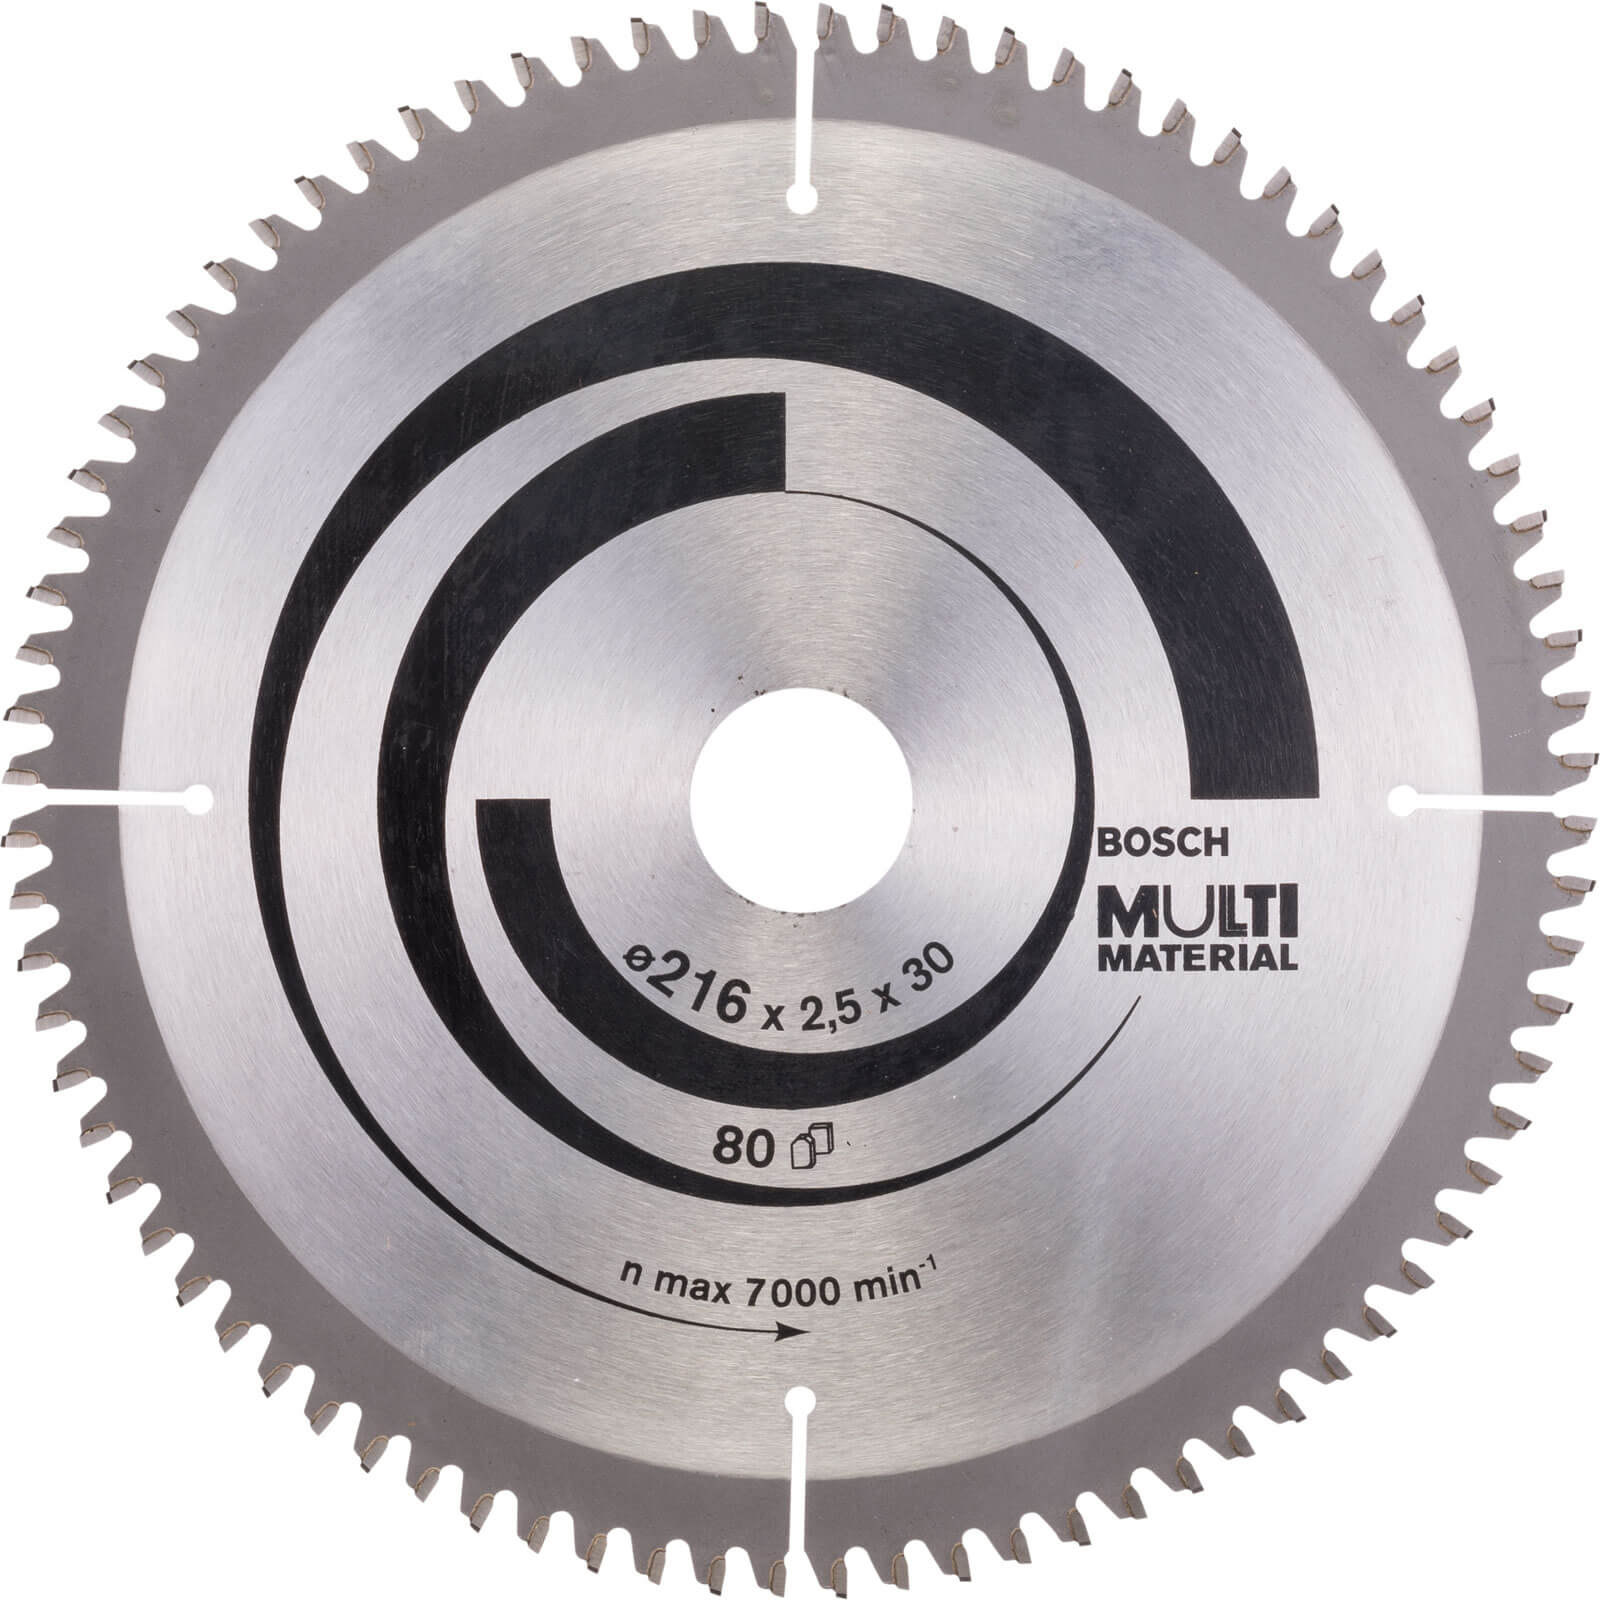 Photos - Power Tool Accessory Bosch Multi Material Cutting Mitre and Table Saw Blade 216mm 80T 30mm 